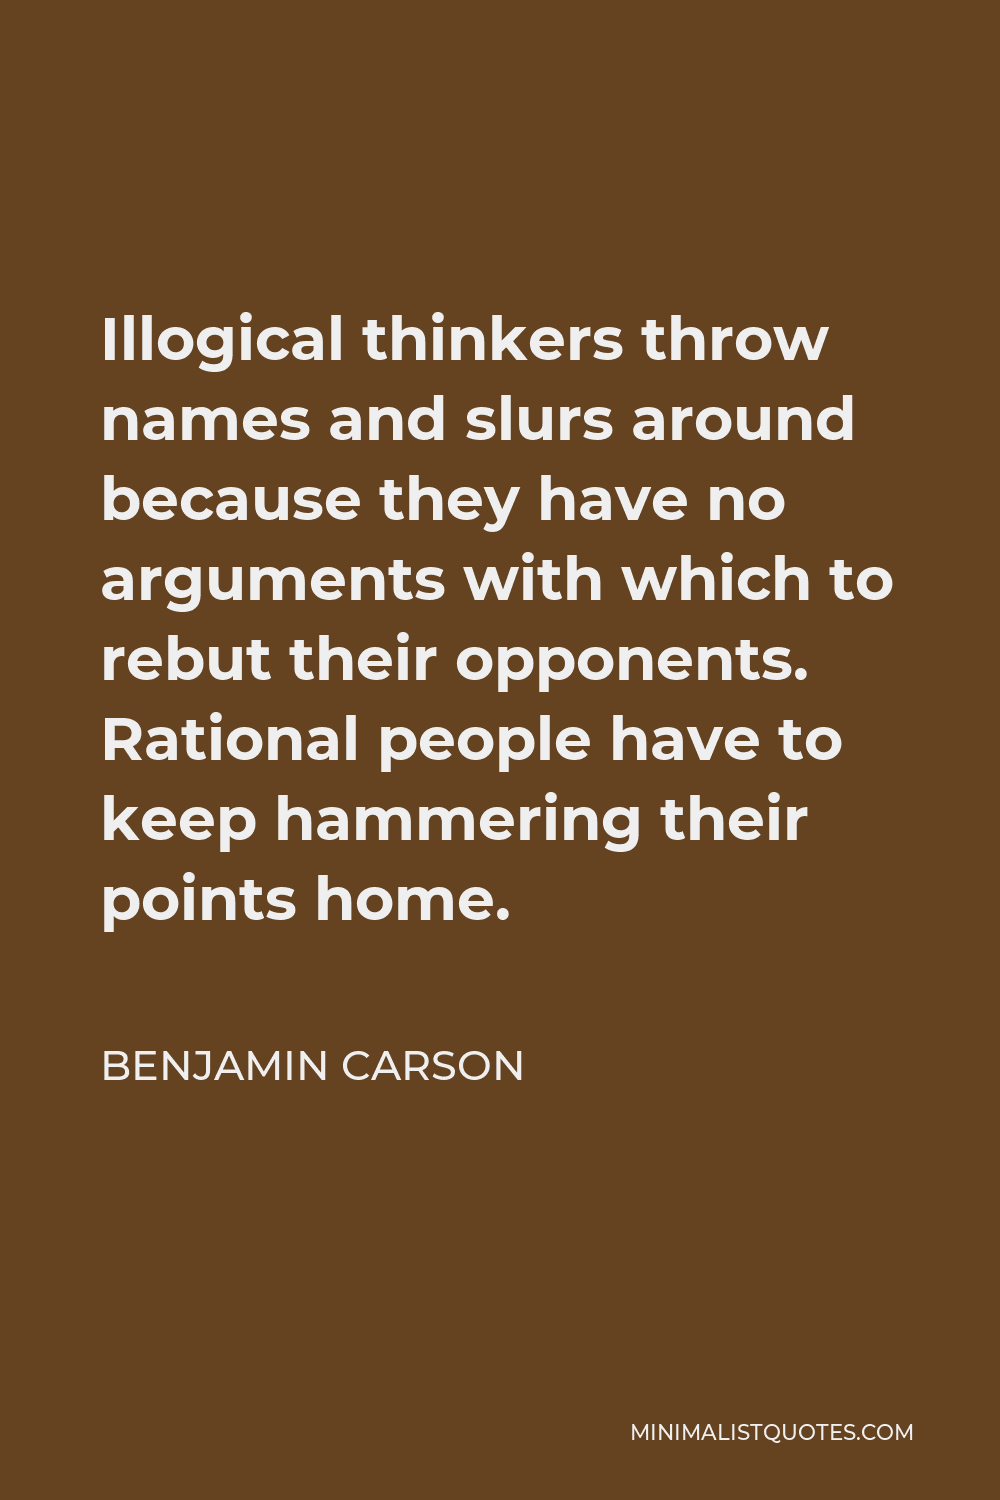 Benjamin Carson Quote - Illogical thinkers throw names and slurs around because they have no arguments with which to rebut their opponents. Rational people have to keep hammering their points home.